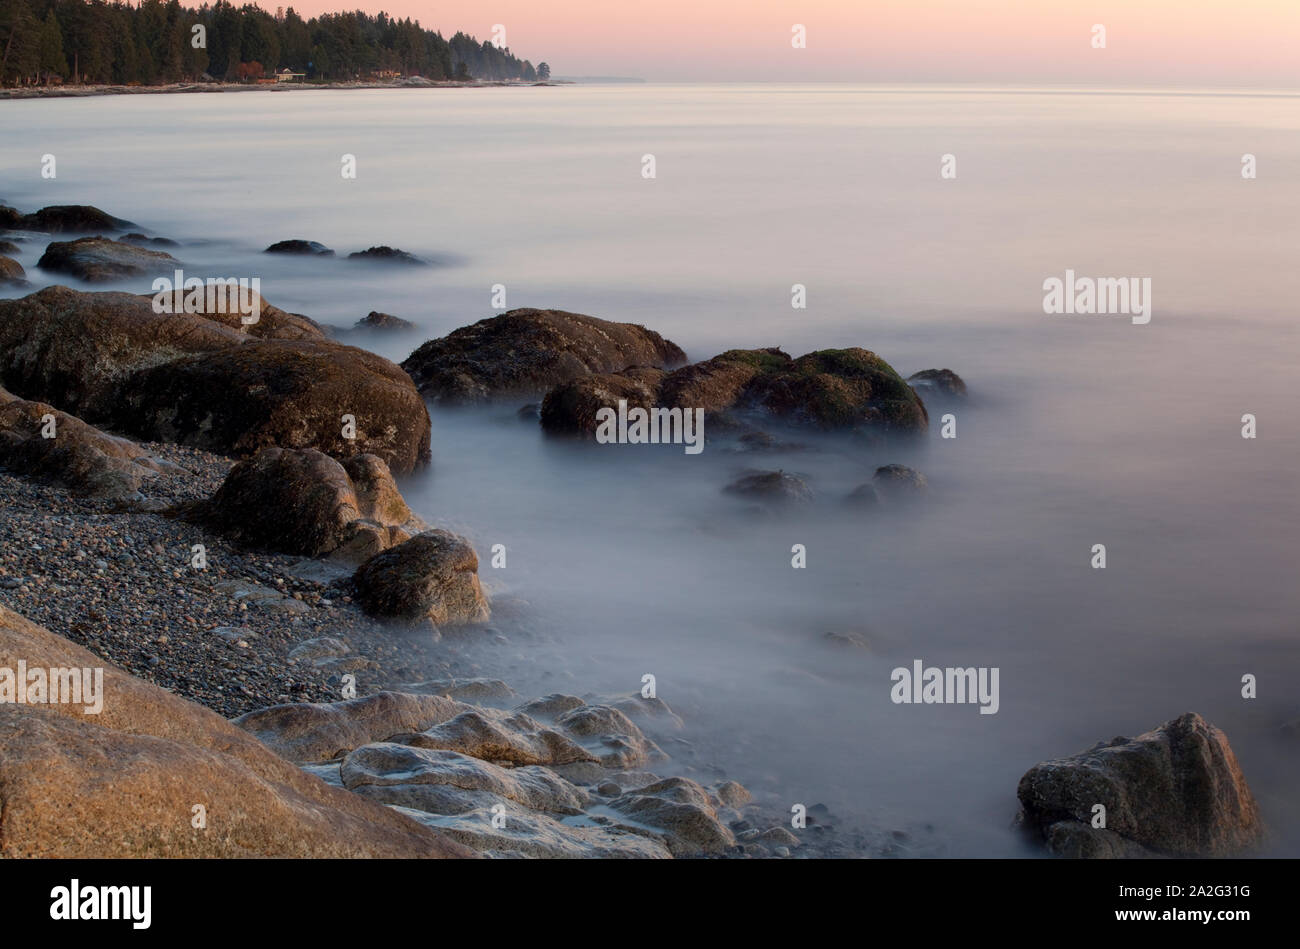 Seascape at Browning Beach, Sechelt, BC Stock Photo